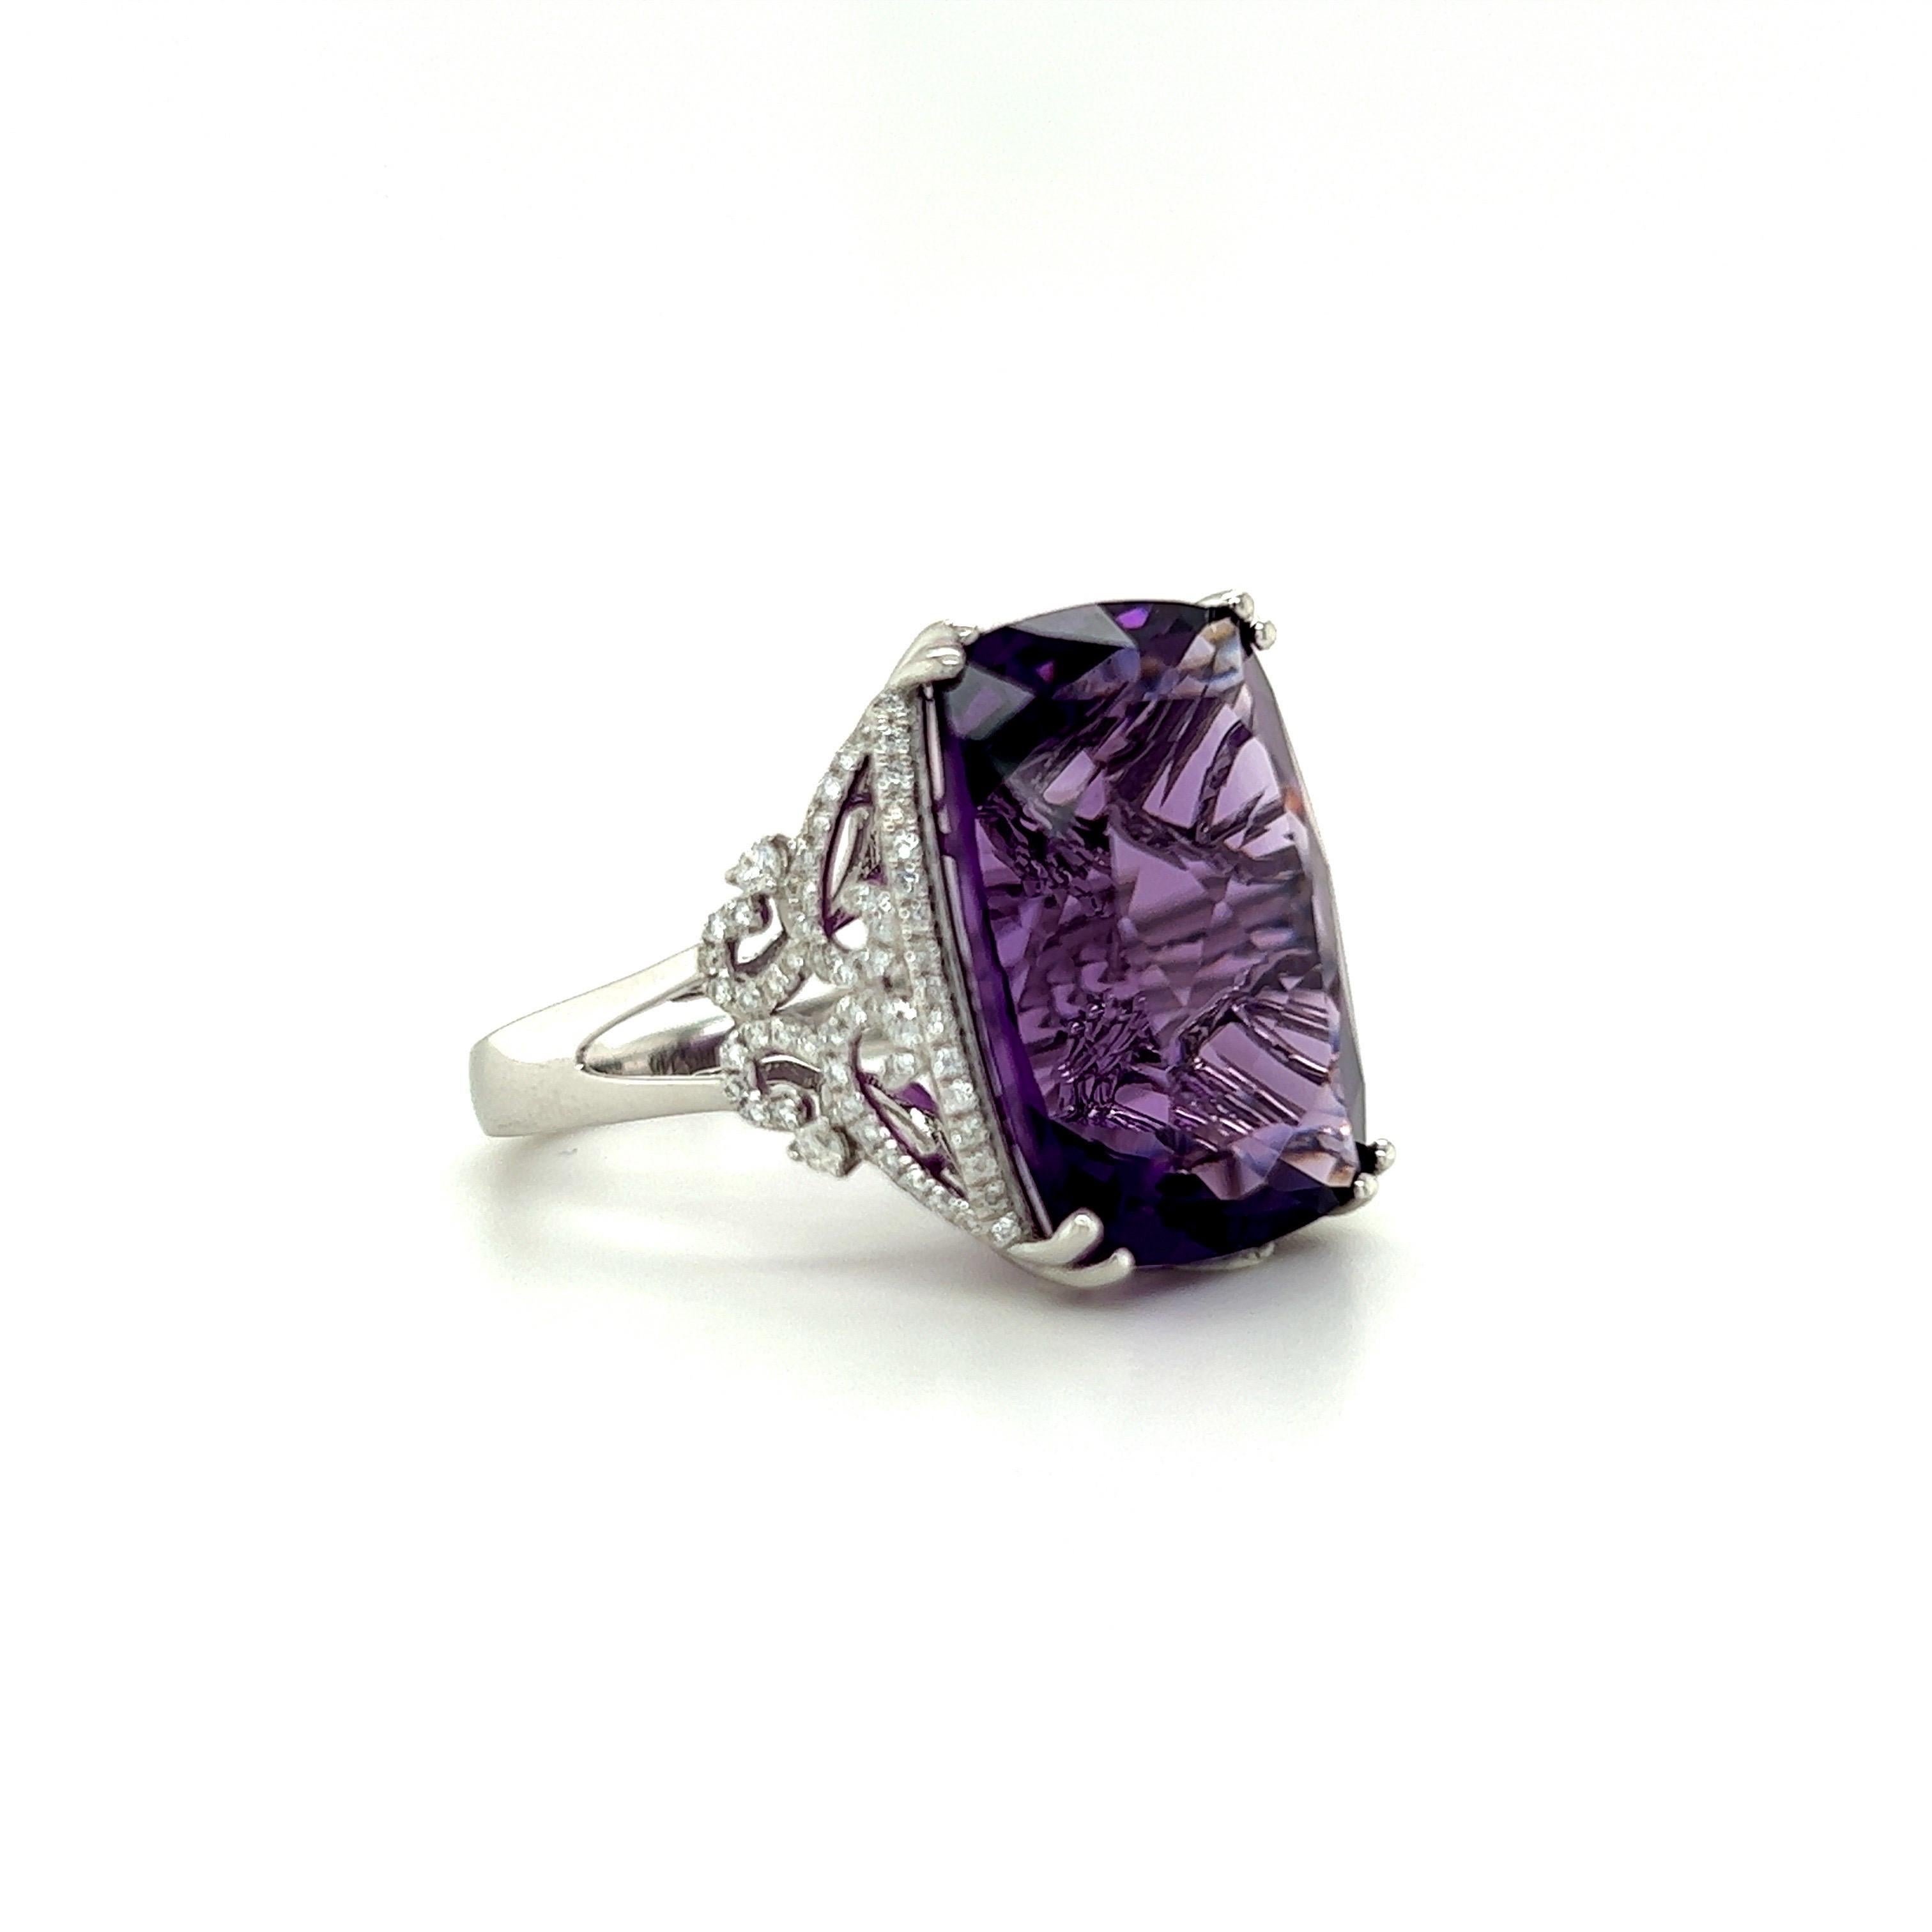 Glamorous amethyst cocktail ring. High brilliance, transparent clean, cushion faceted, rich eggplant purple tone natural 15.91 carats amethyst mounted in high profile open basket with eight bead prongs. Accented with round brilliant diamond.